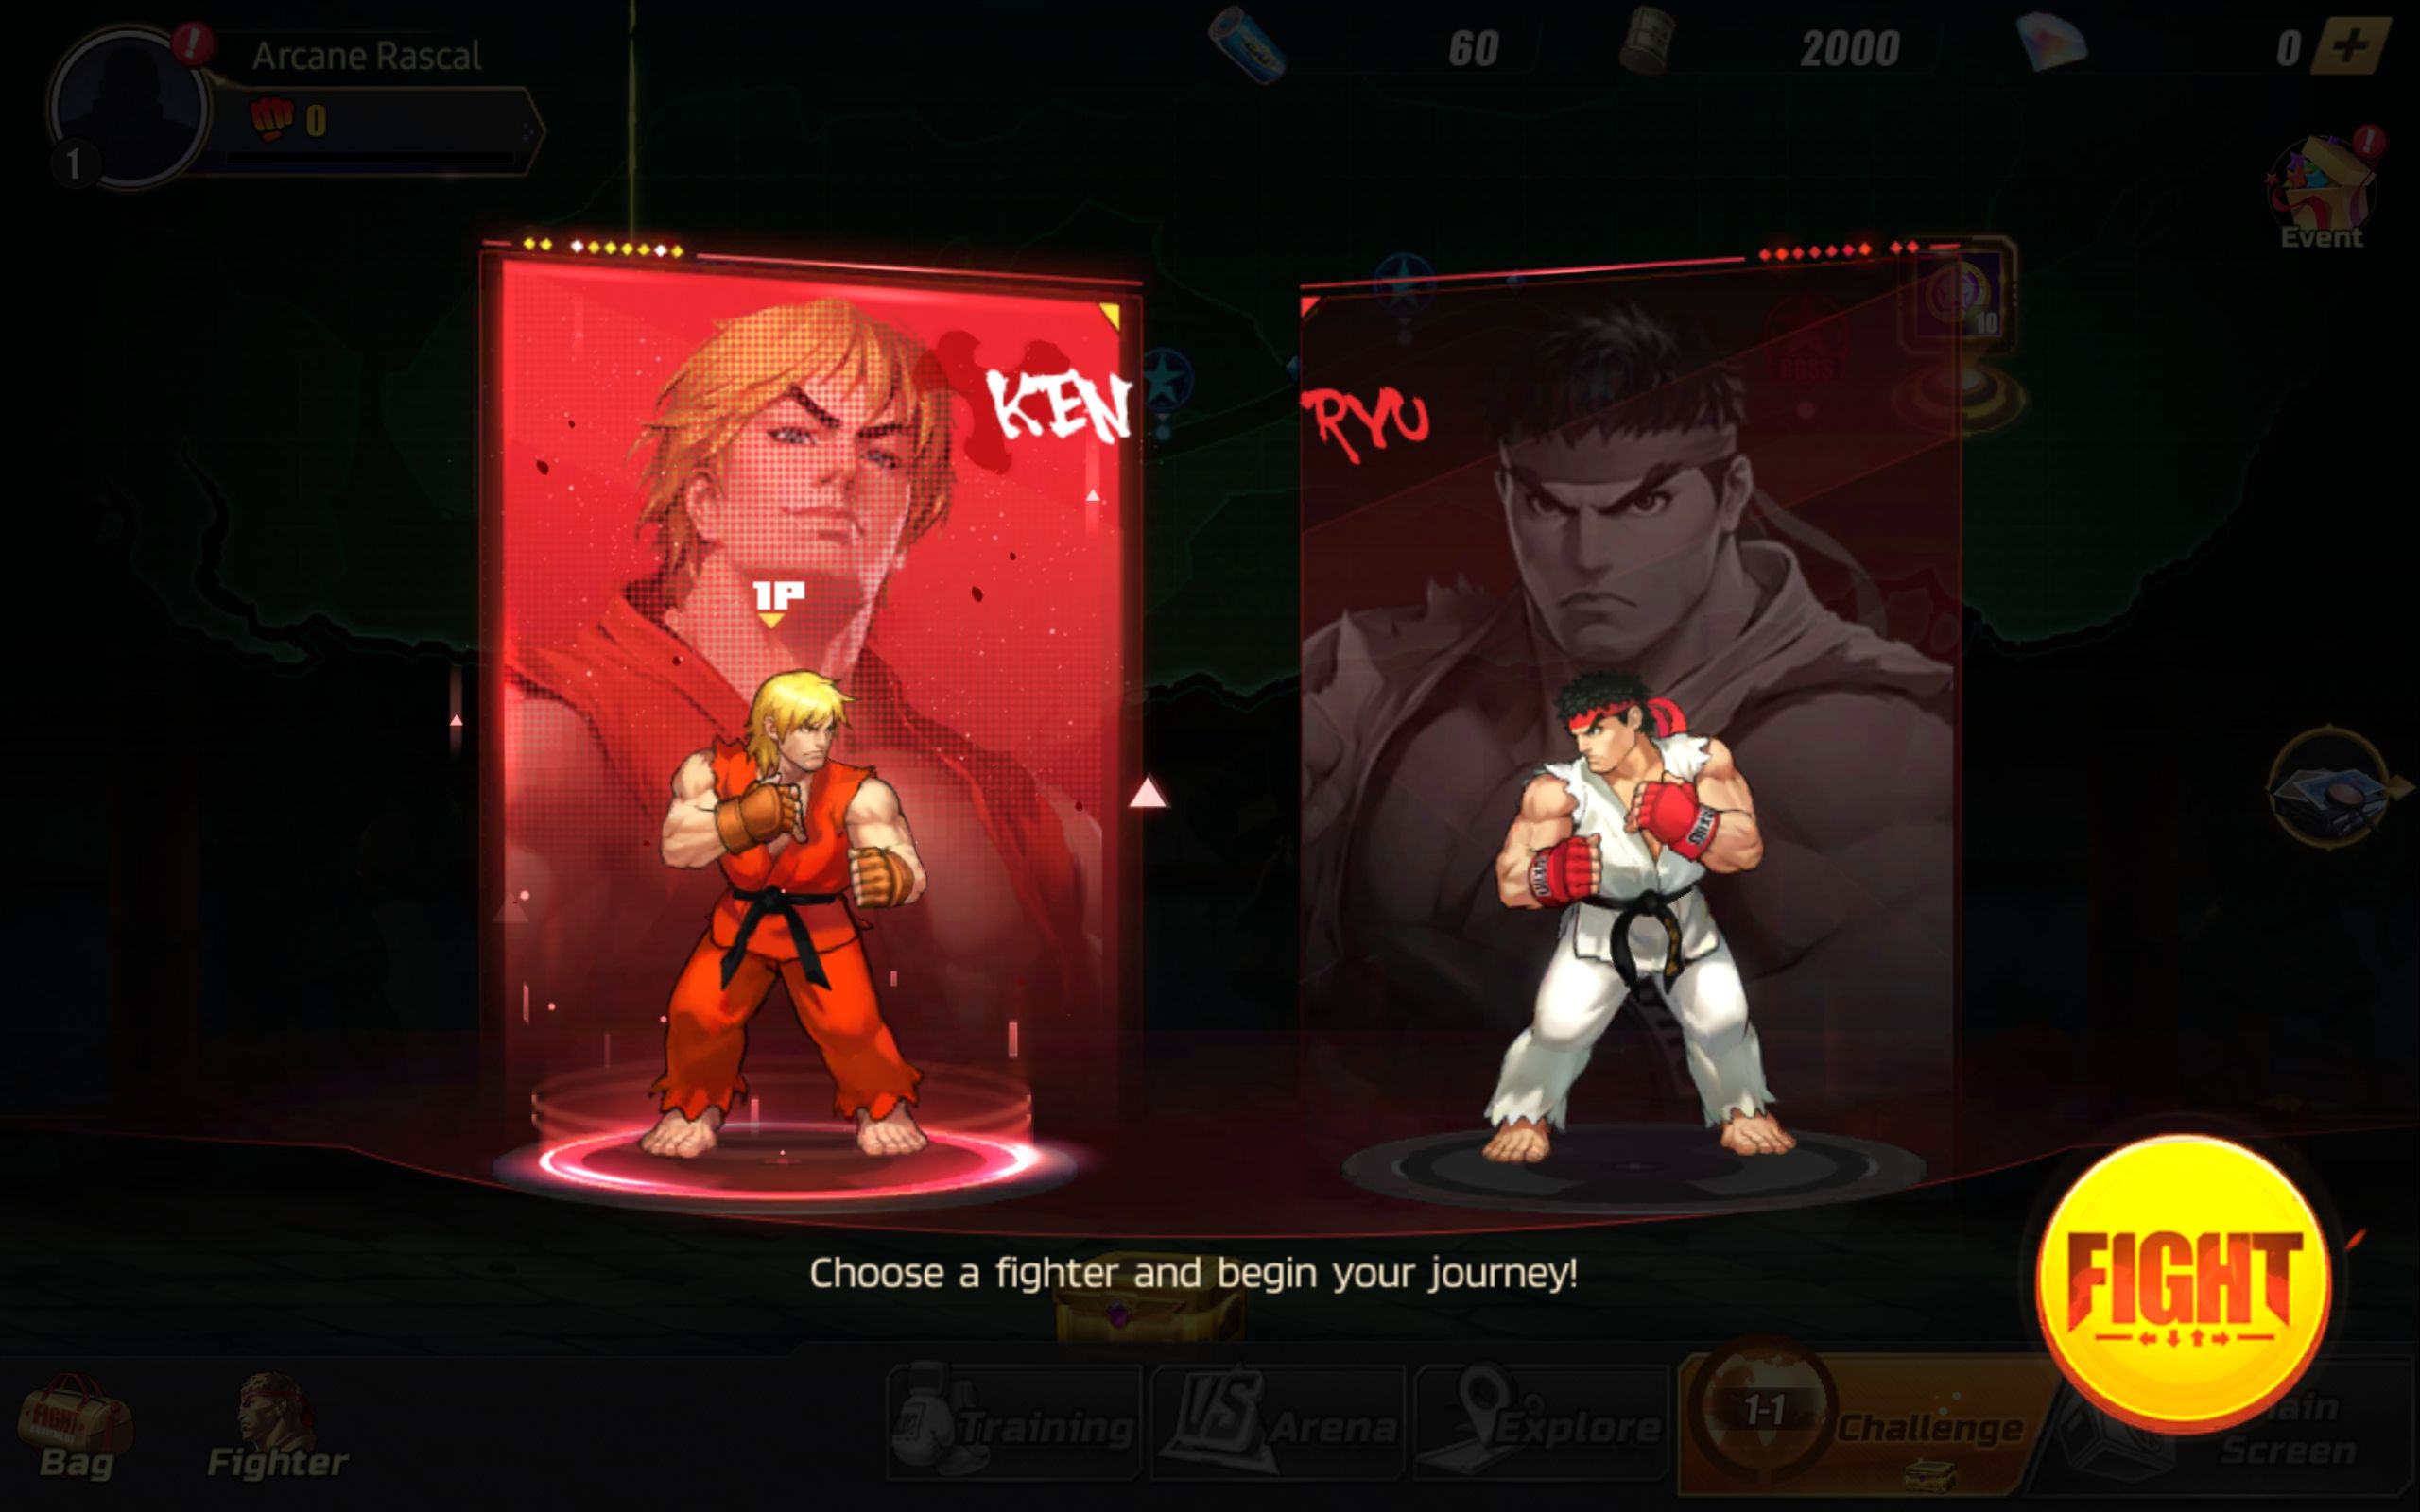 Street Fighter: A duel screen where you choose between Ryu and Ken.